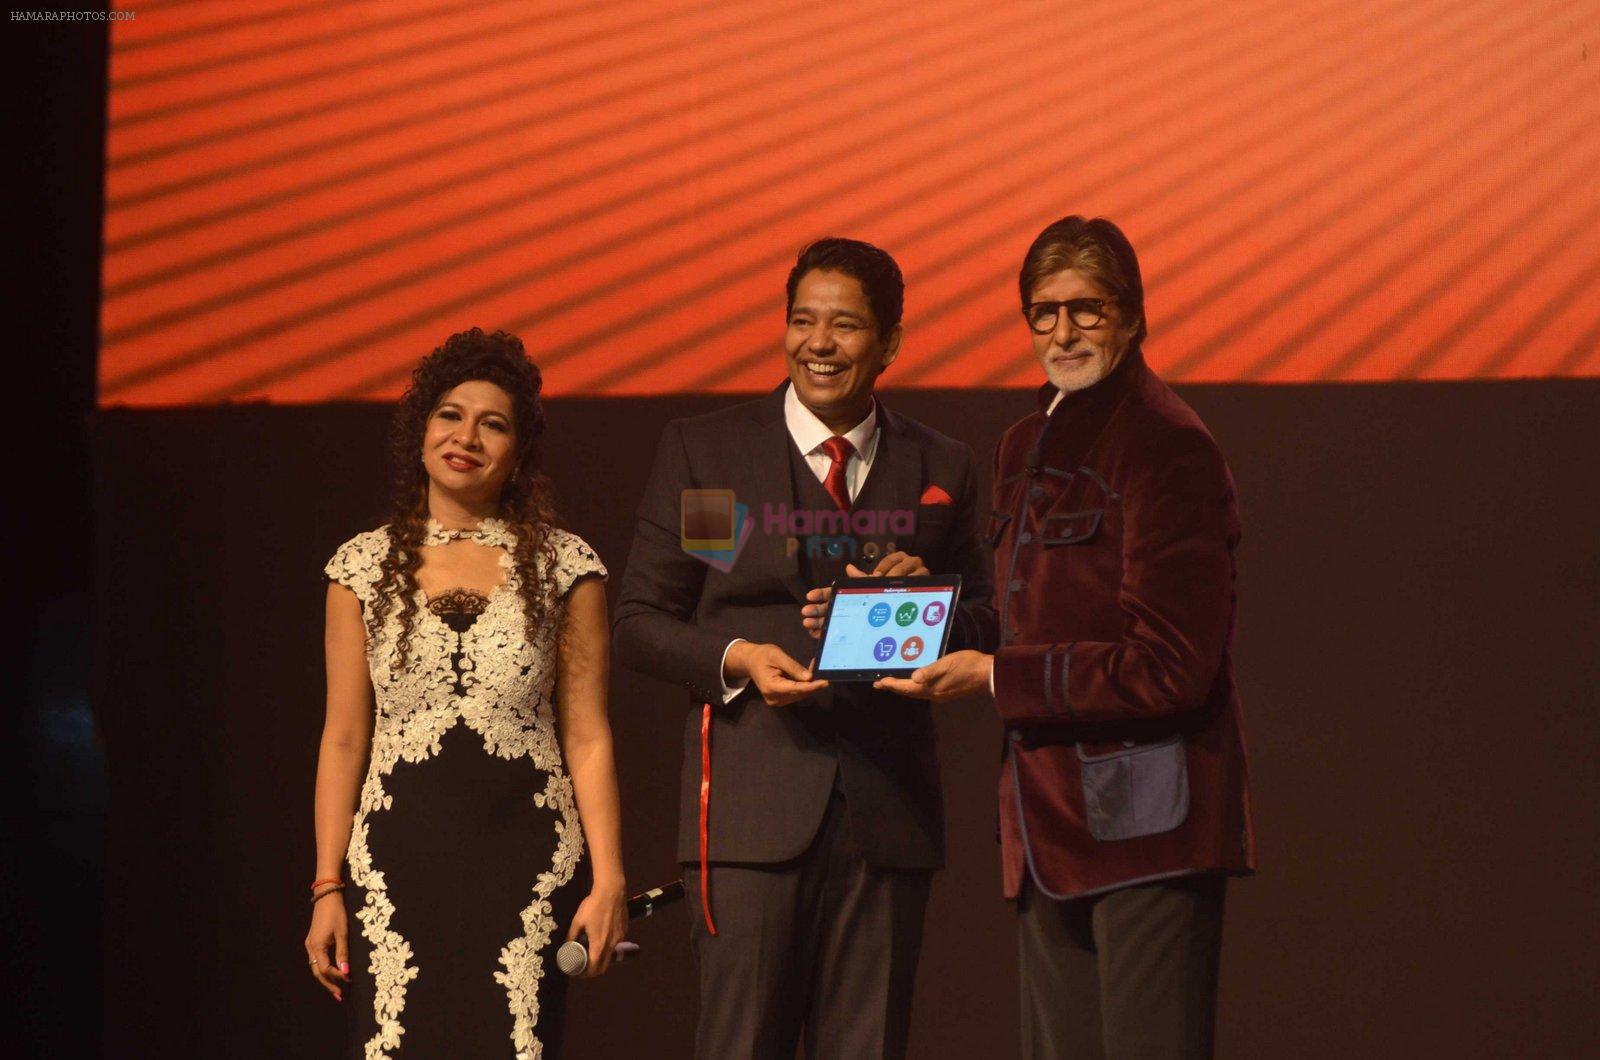 Amitabh Bachchan launches learning tool Robomate on 12th June 2016